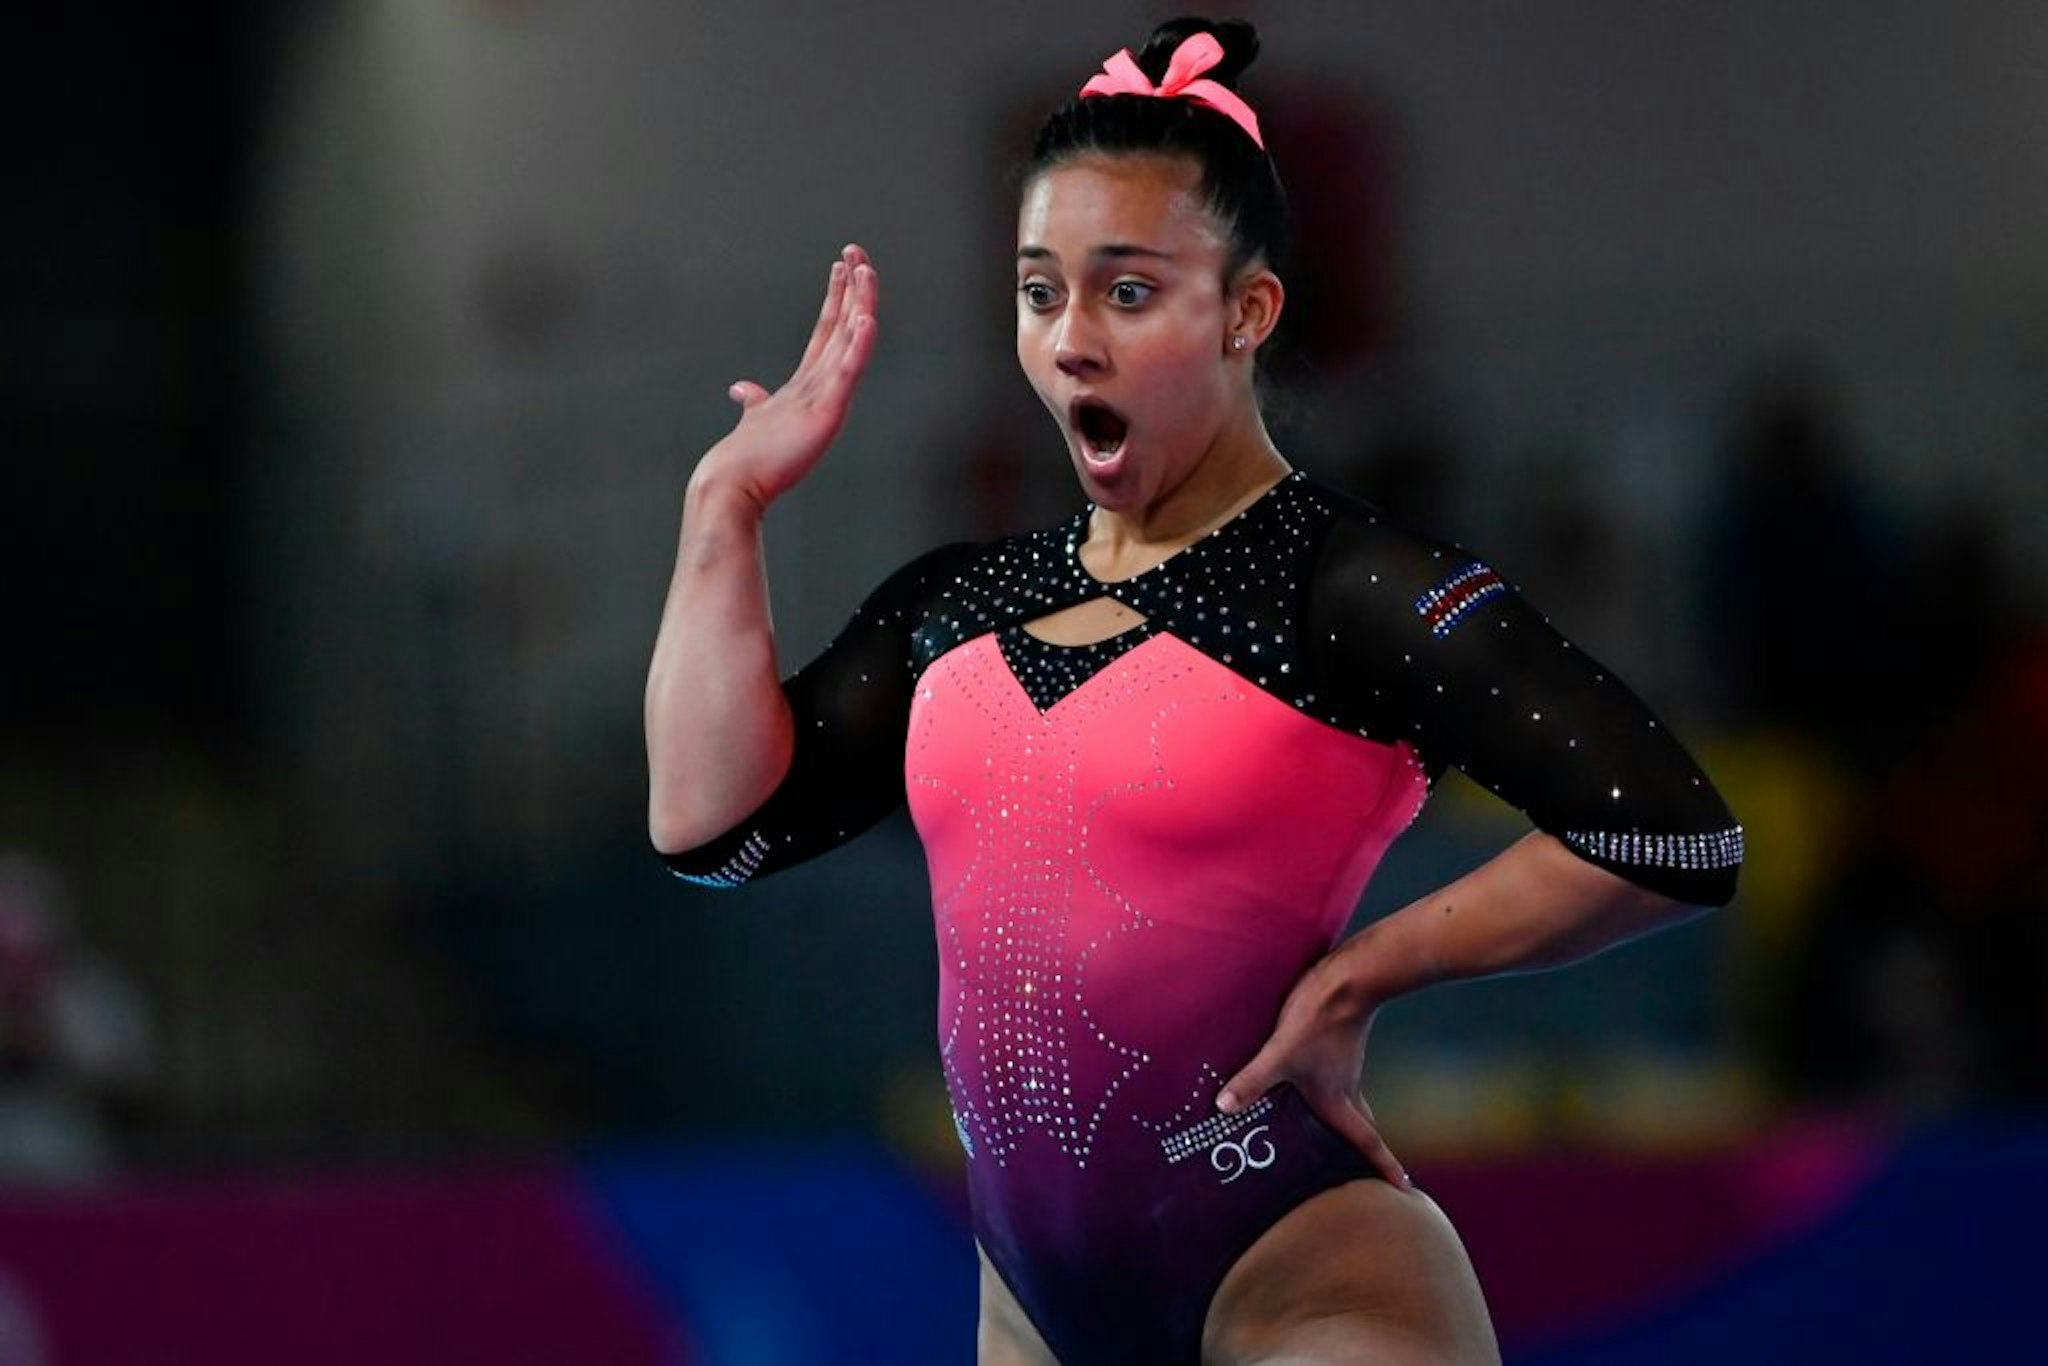 Costa Rica's Luciana Alvarado competes in women's individual floor during the Panamerican Games Lima 2019 in Lima, Peru, on July 29, 2019.